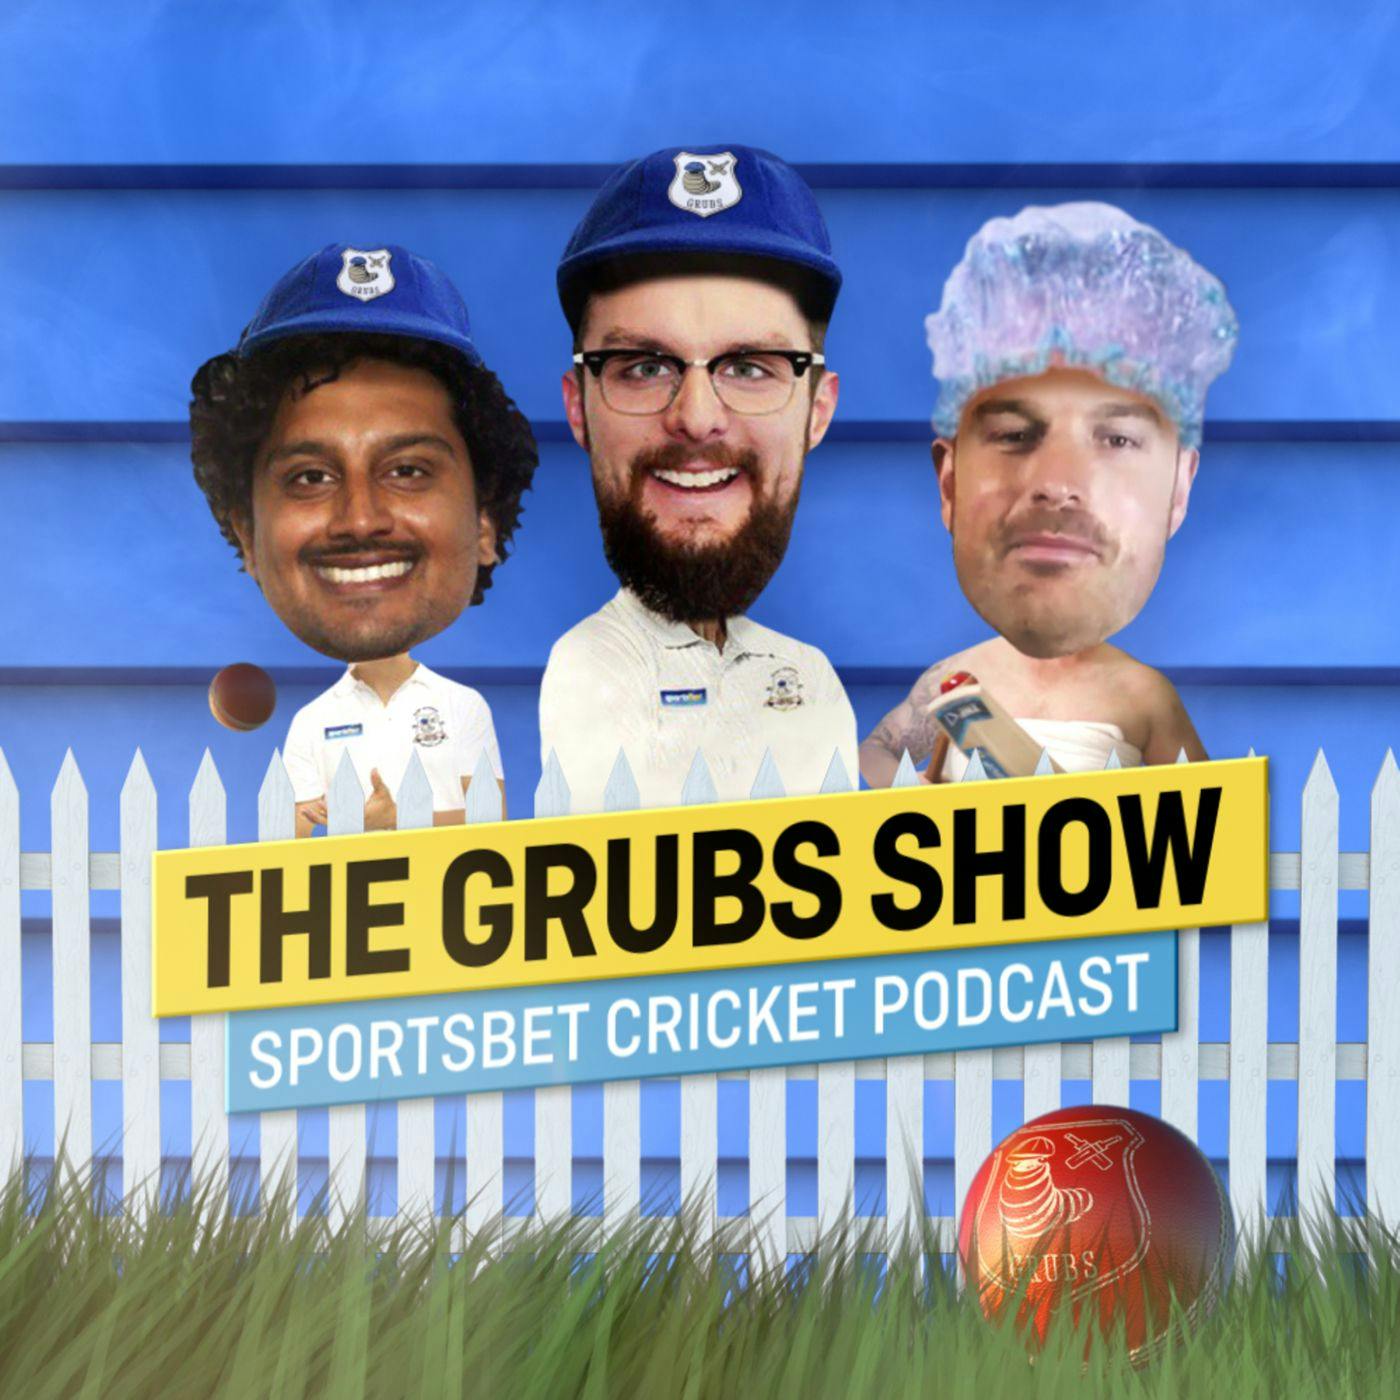 S2 Ep 11 - Grubs on Tour: Lord's Toffs, Jofra Archer and Charlie Chaplin